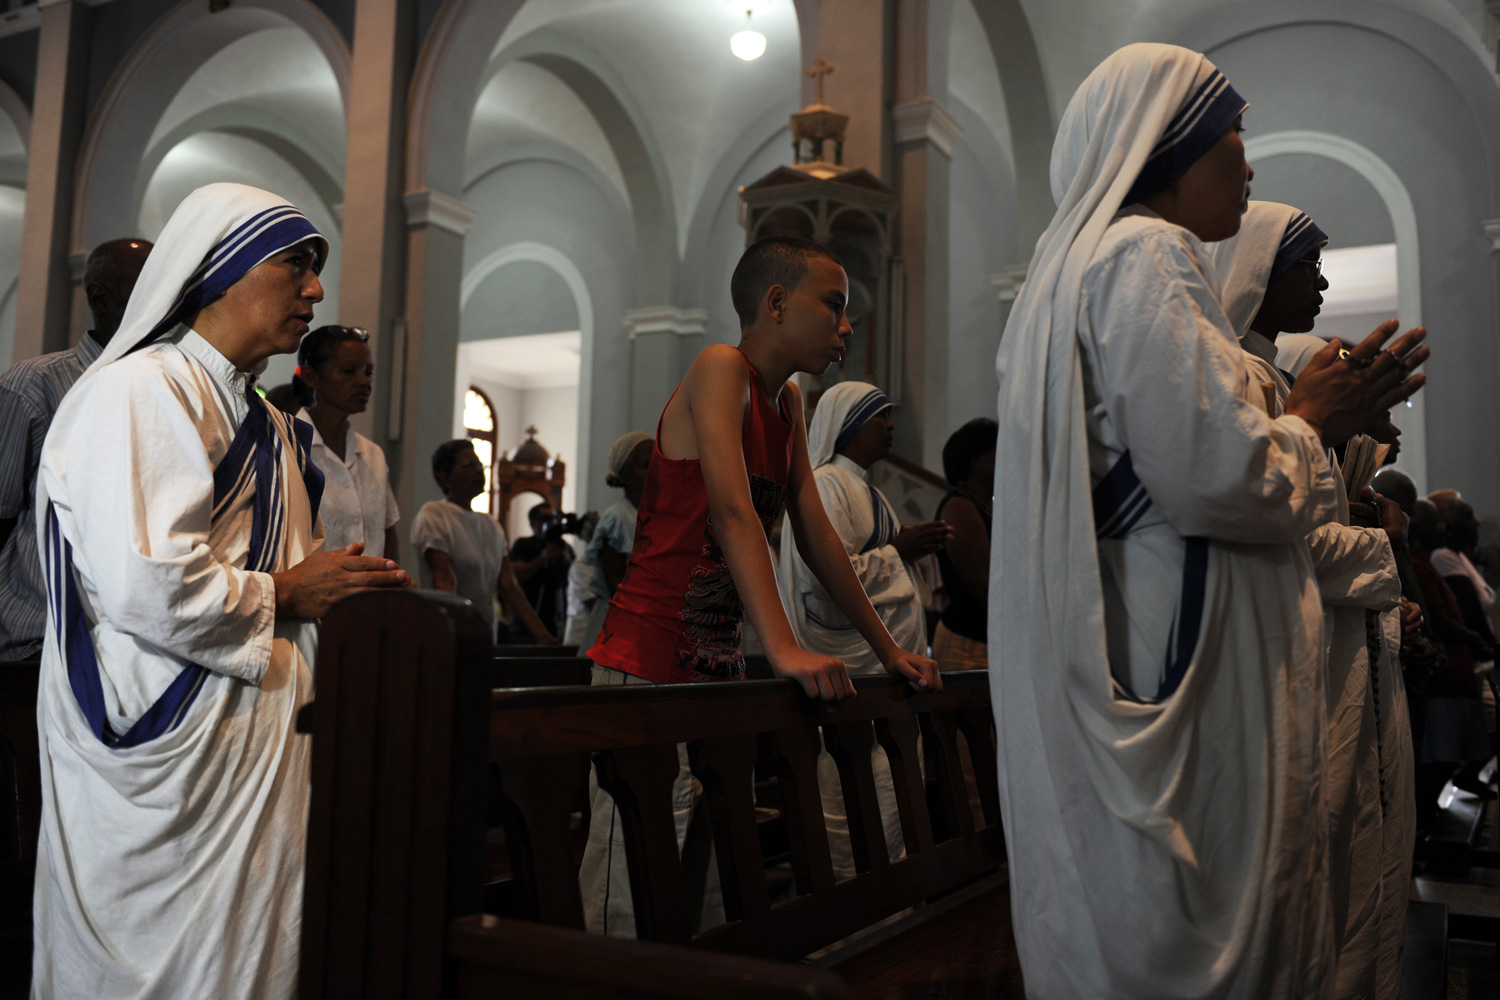 March 25, 2012. Nuns attend a mass at the Church of Charity in El Cobre, southeast of Havana.